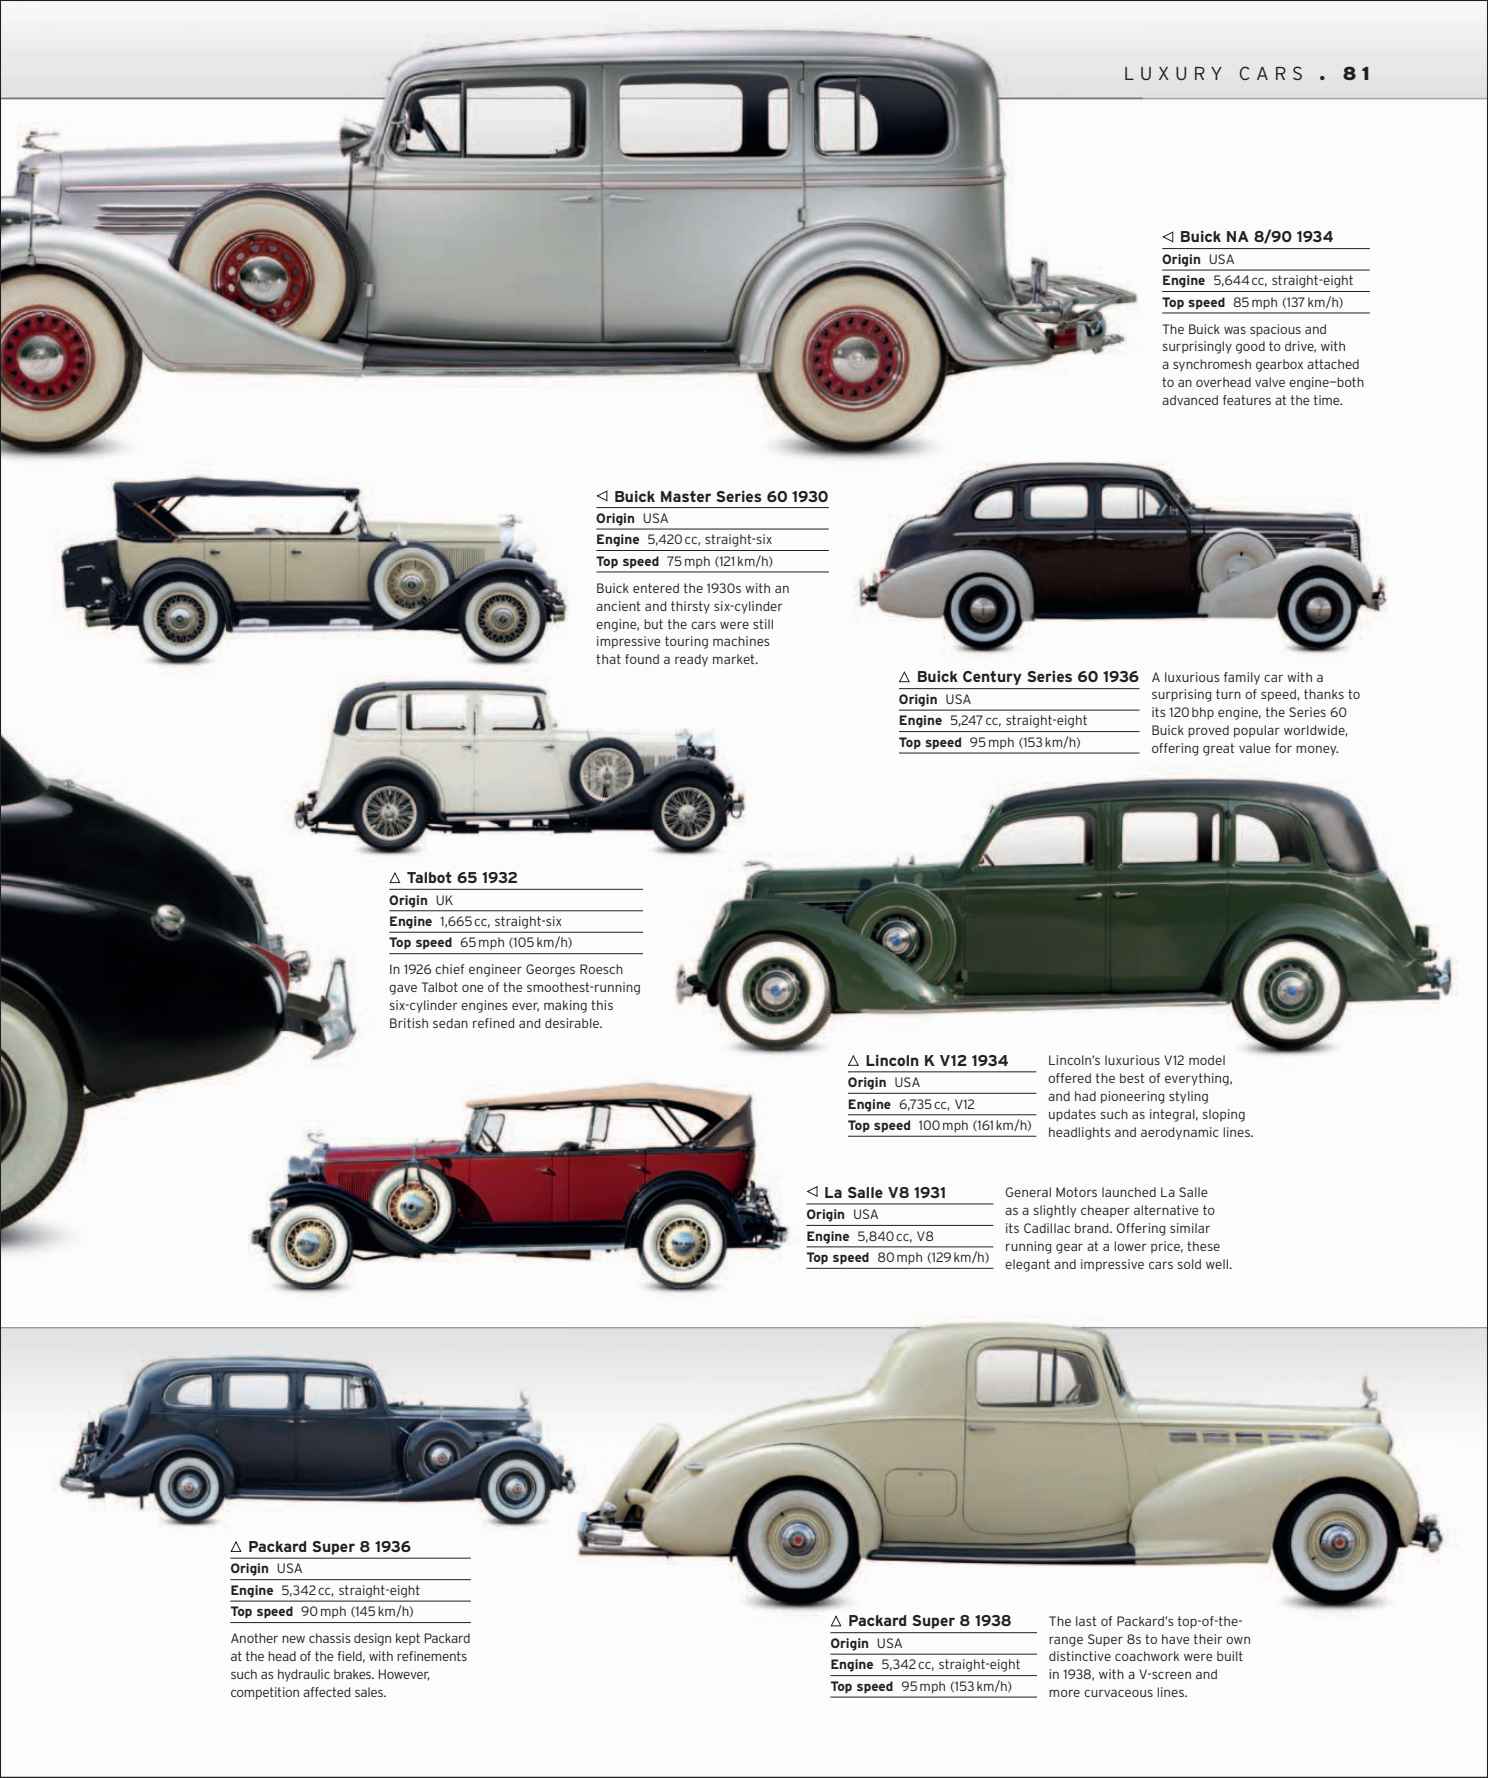 Car%20-%20The%20Definitive%20Visual%20History%20of%20the%20Automobile_083.png